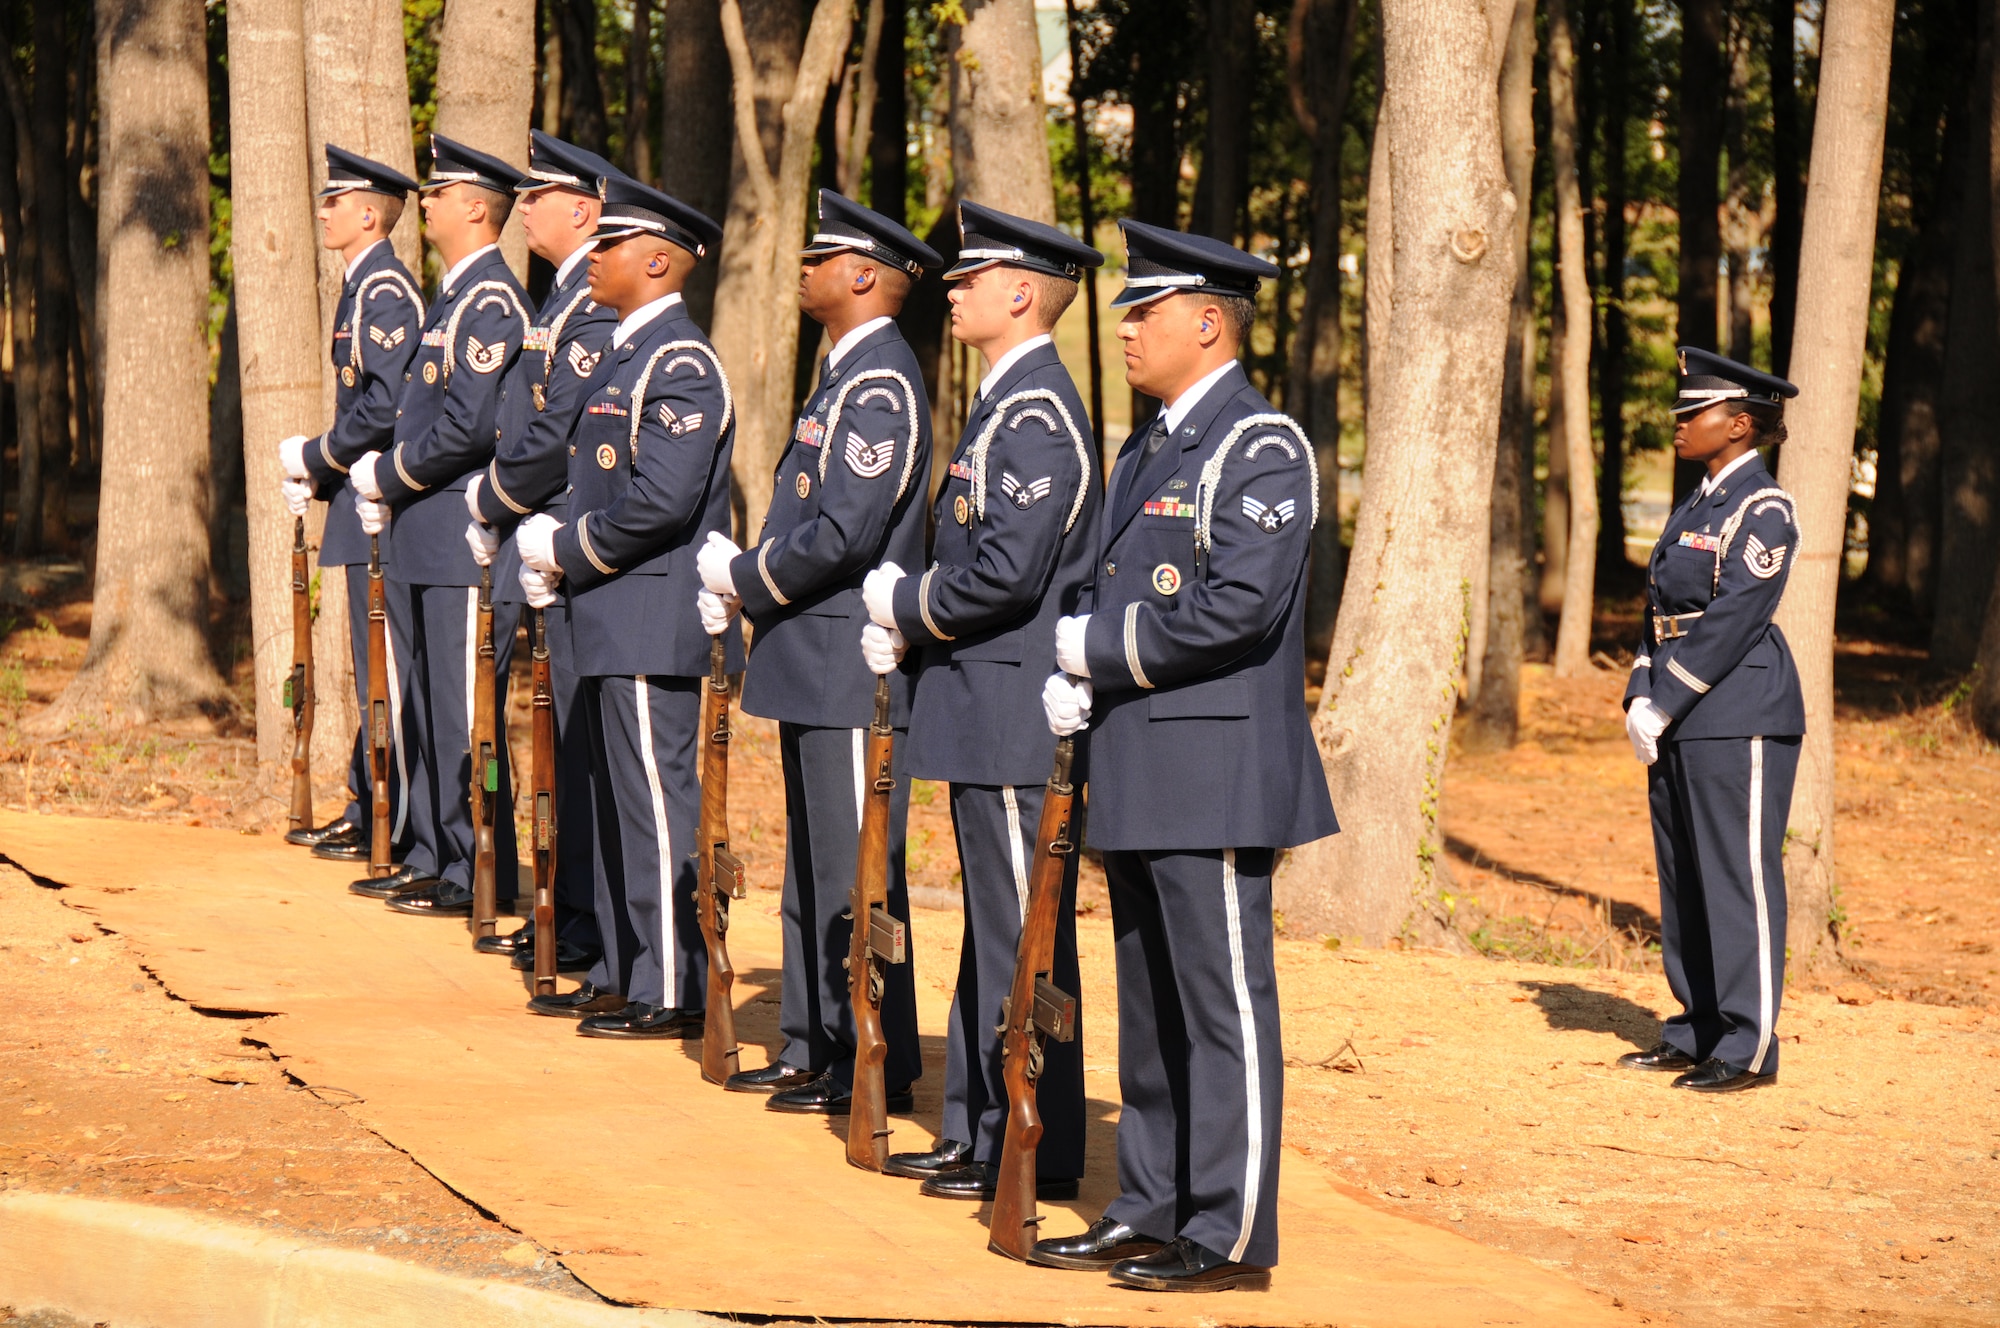 Charlotte, N.C. -- Airmen of the 145th Airlift Wing Honor Guard stand by at the memorial service honoring North Carolina Air National Guardsmen deceased in the last year. (NCANG photo by Tech. Sgt. Rich Kerner)